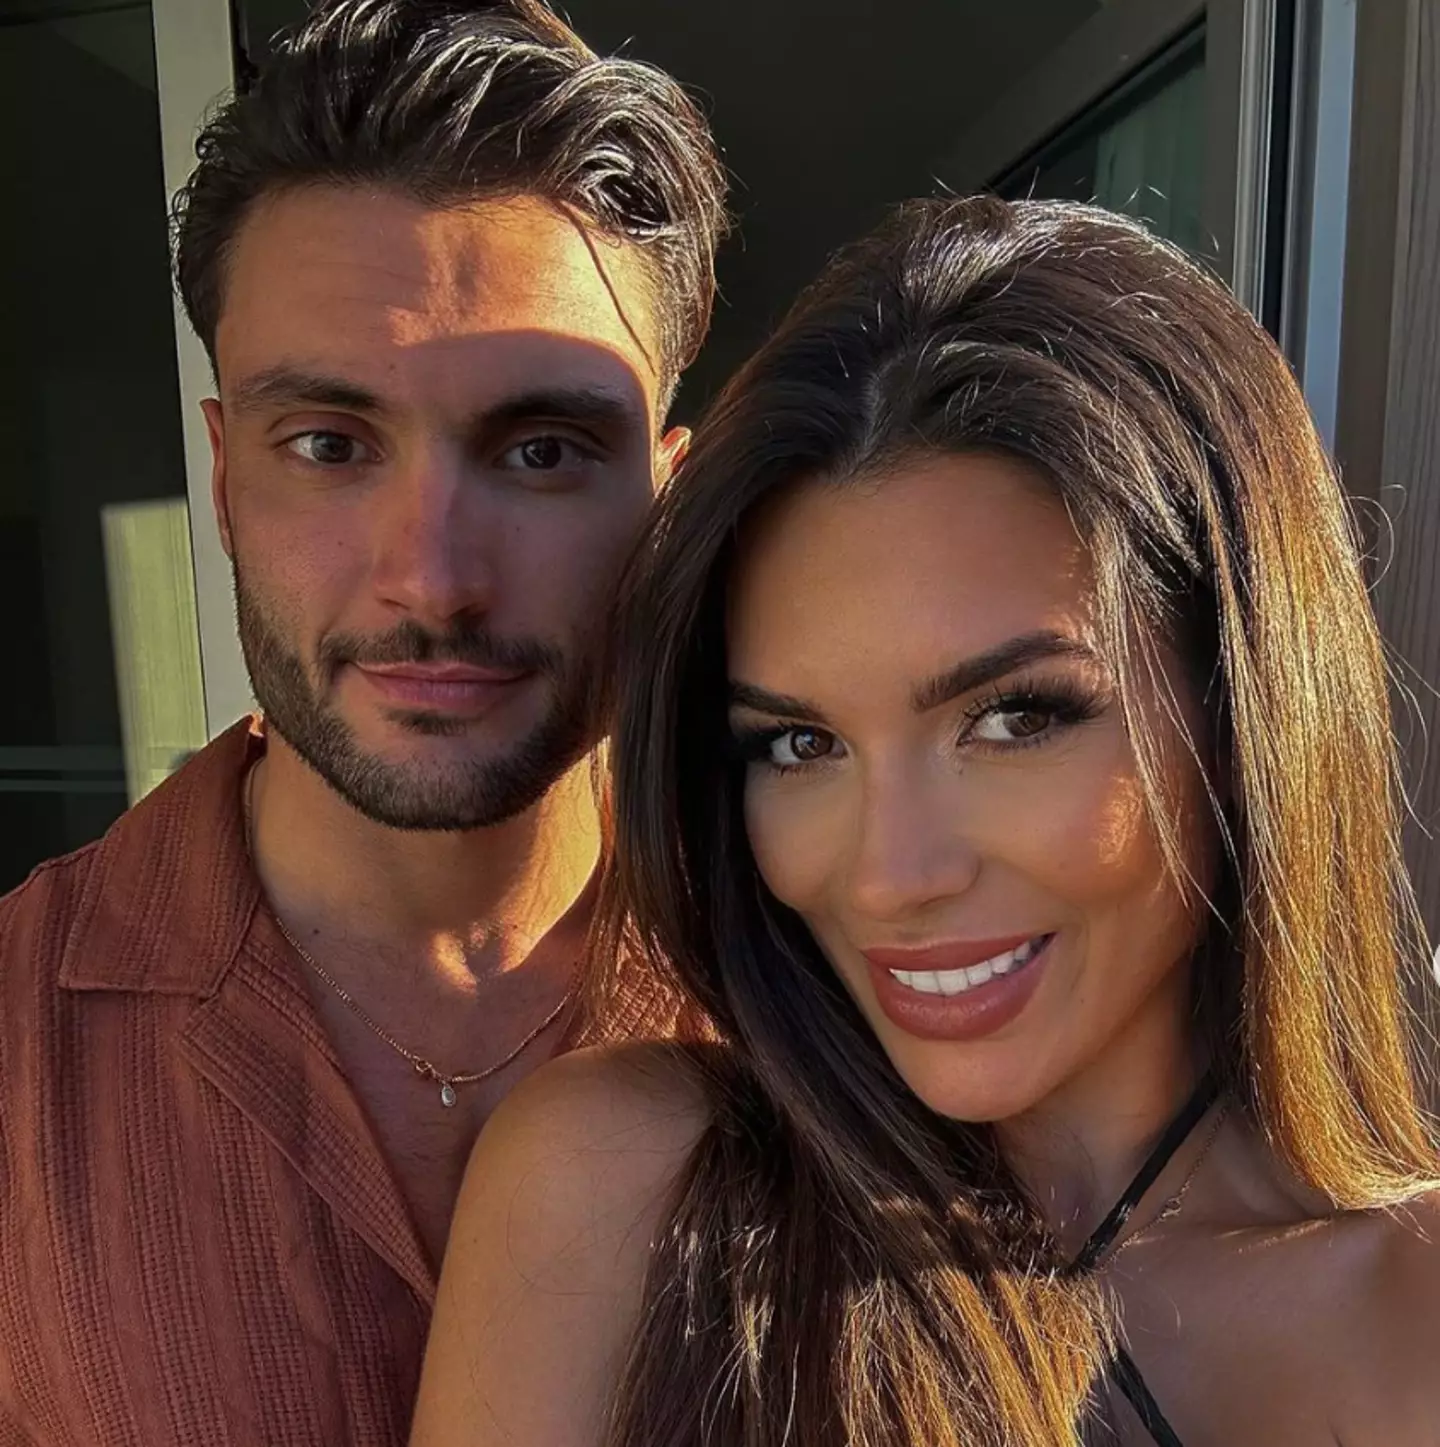 Davide and Ekin-Su moved in together after Love Island.